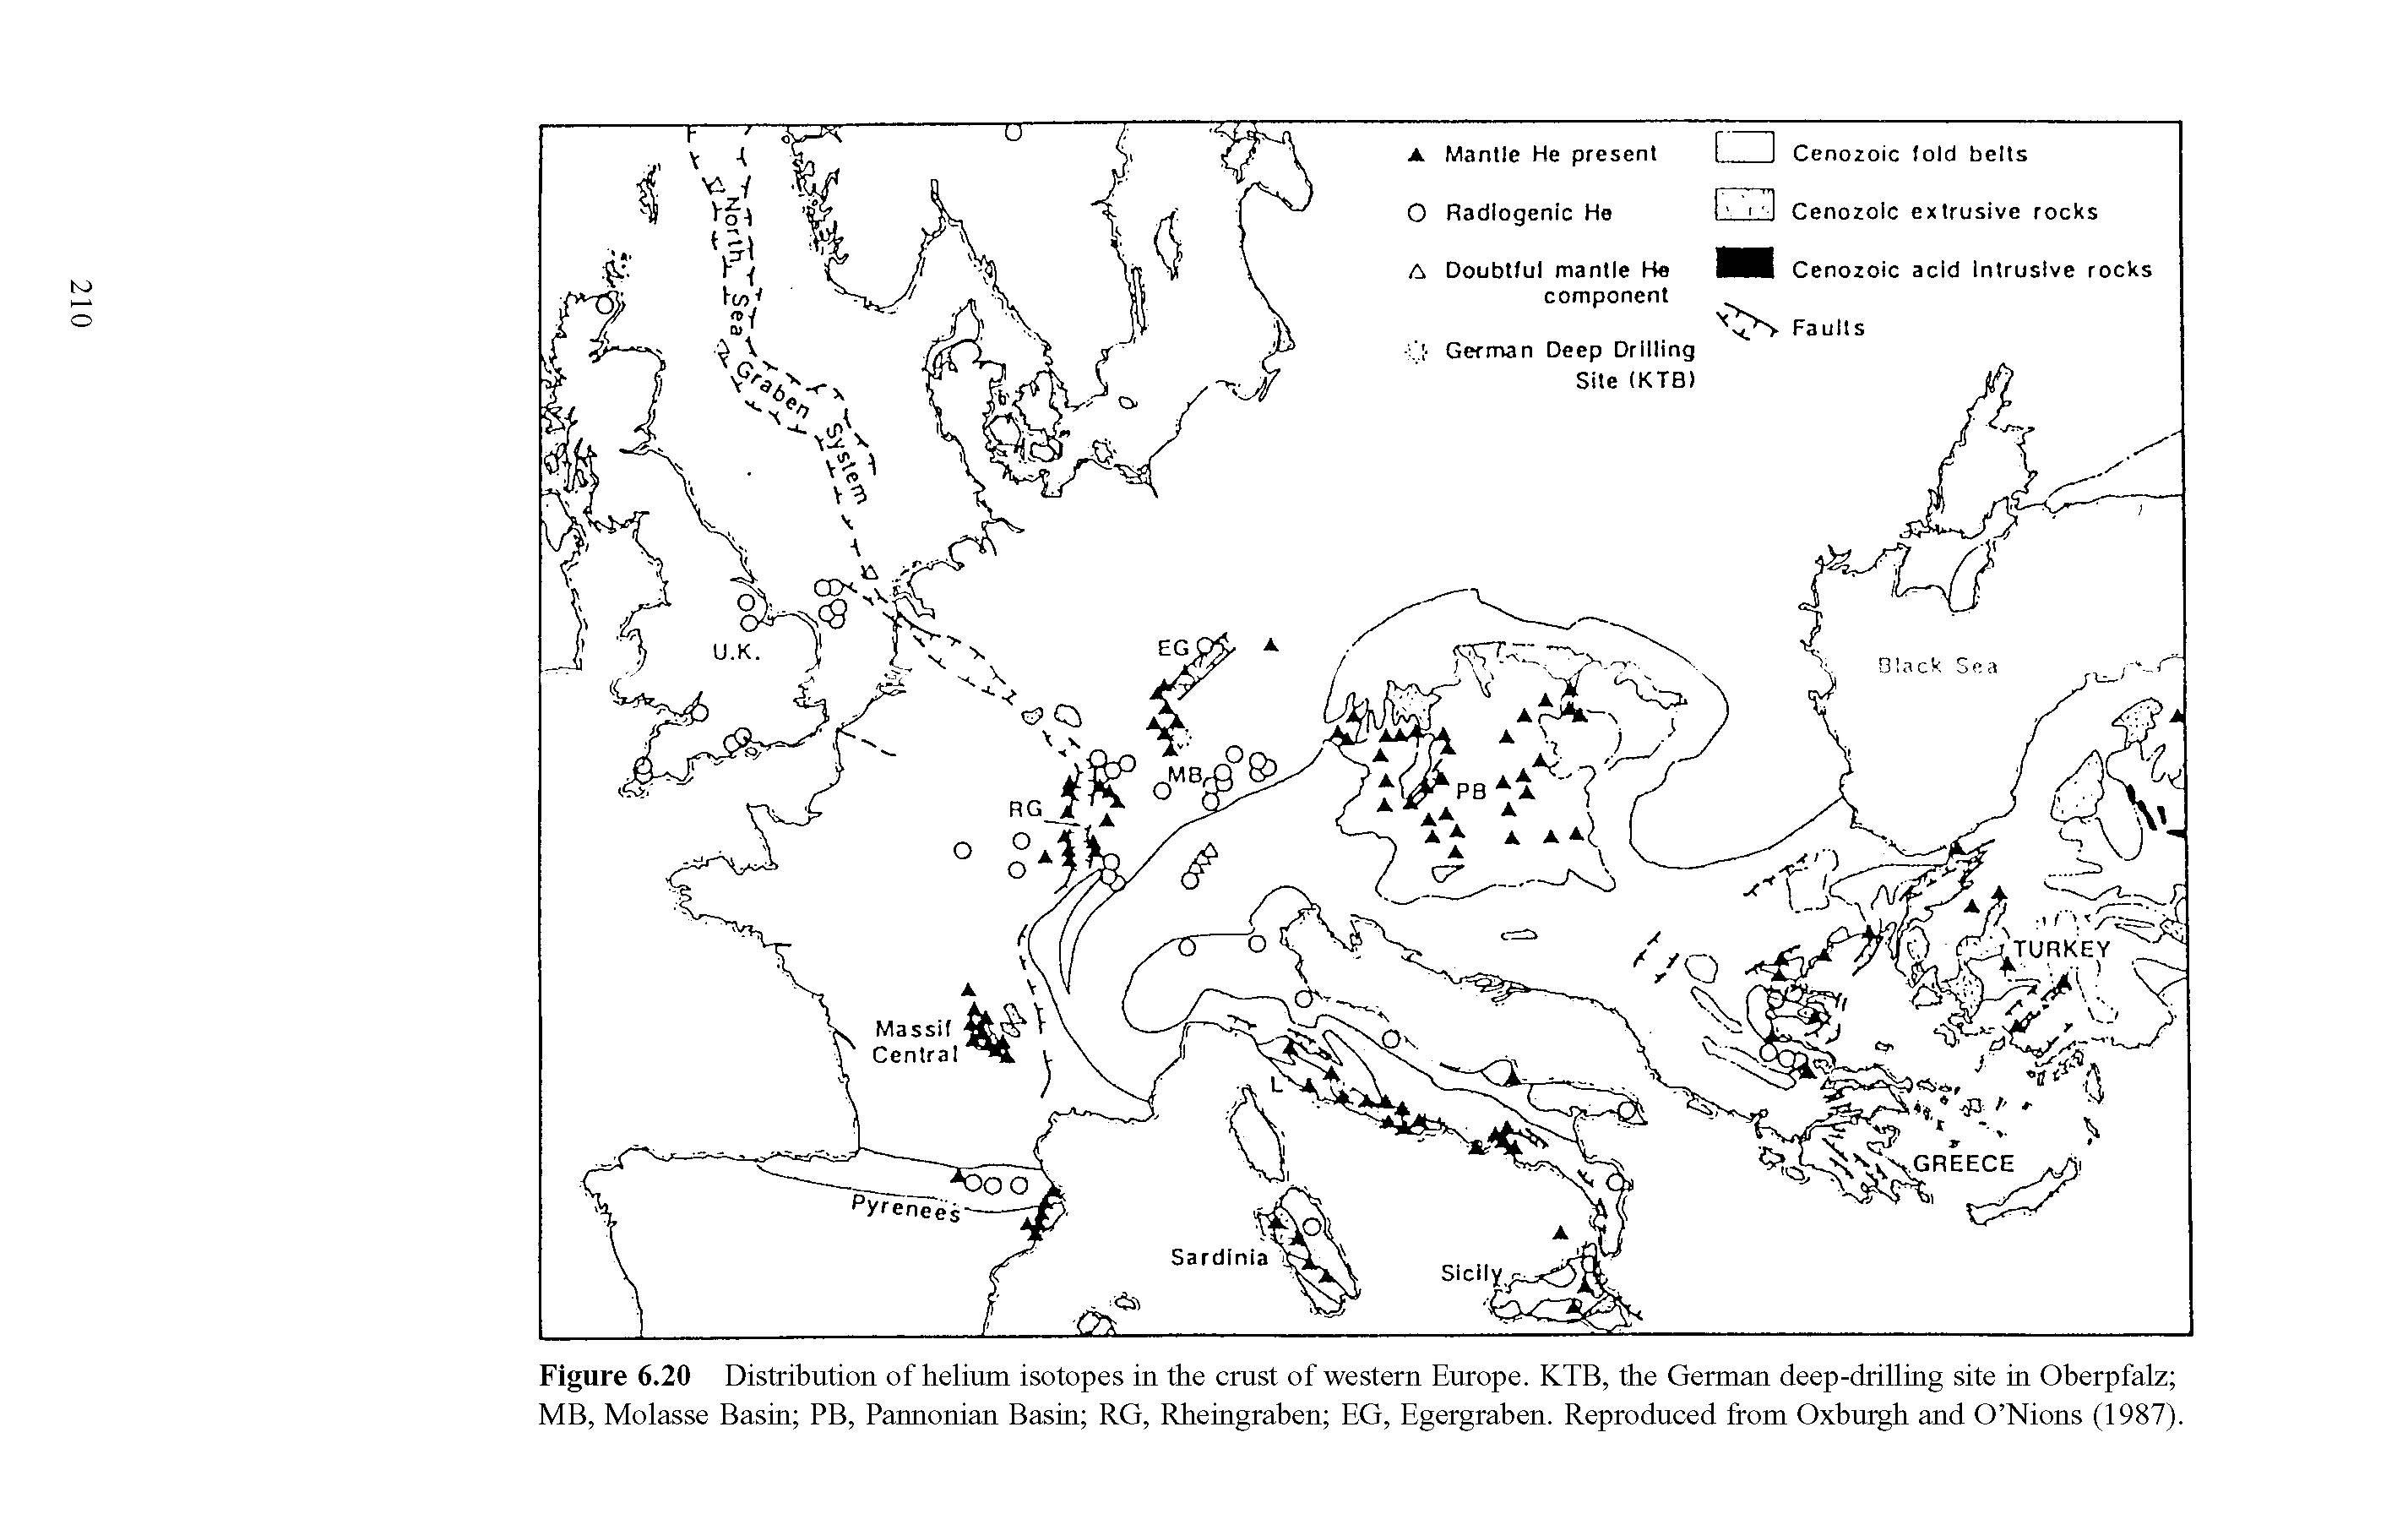 Figure 6.20 Distribution of helium isotopes in the crust of western Europe. KTB, the German deep-drilling site in Oberpfalz MB, Molasse Basin PB, Pannonian Basin RG, Rheingraben EG, Egergraben. Reproduced from Oxburgh and O Nions (1987).